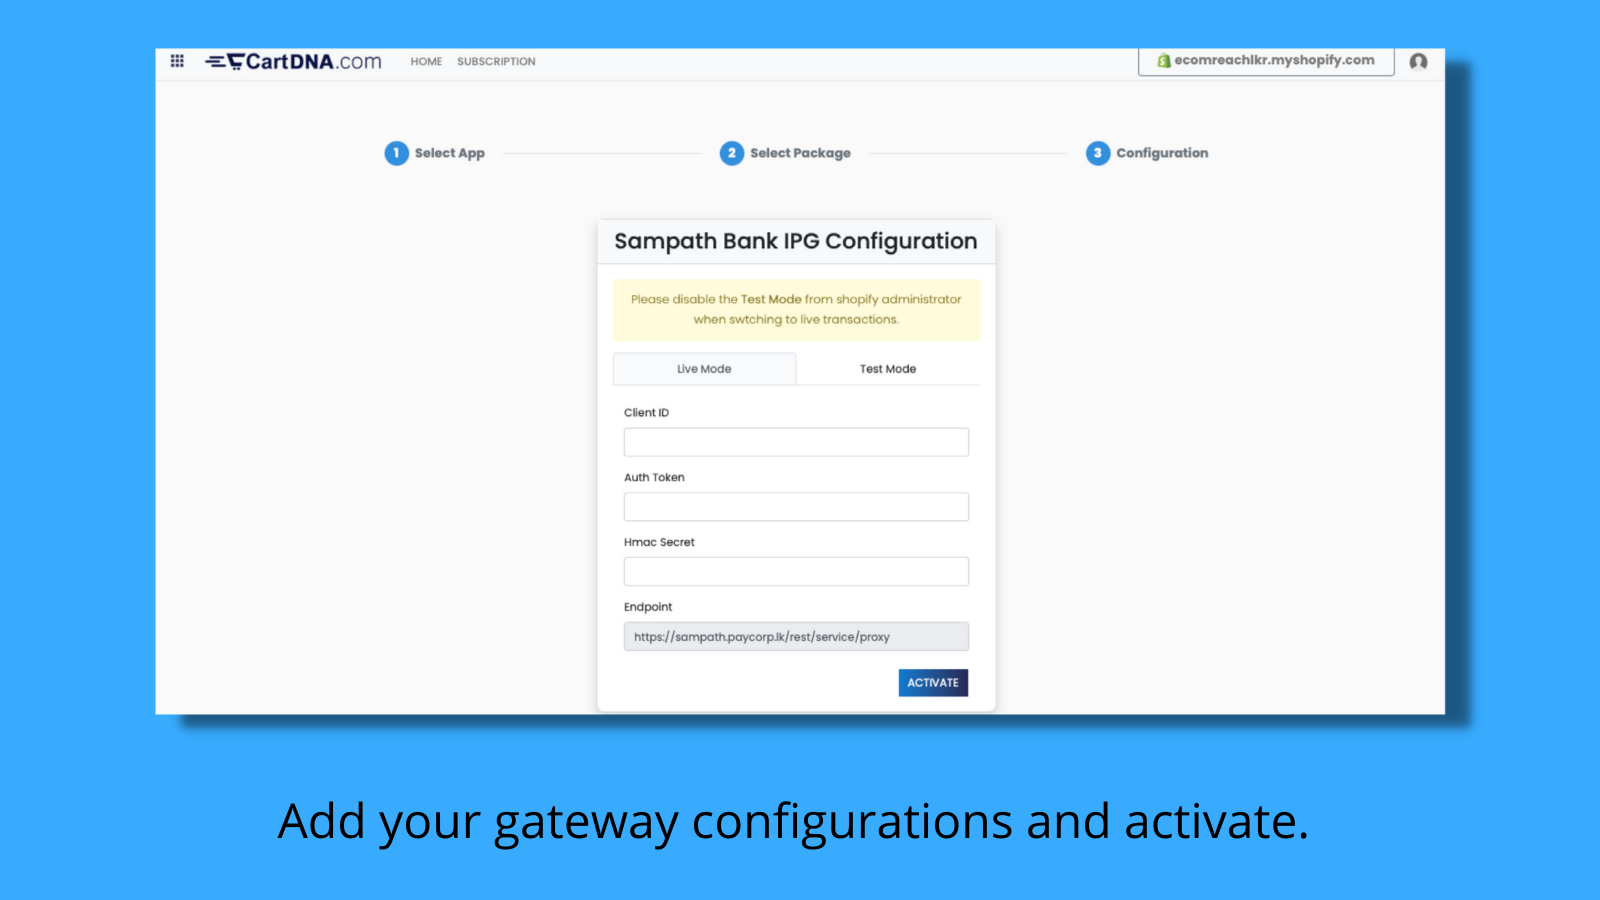 Once approve subscription, you can add gateway API credentials.